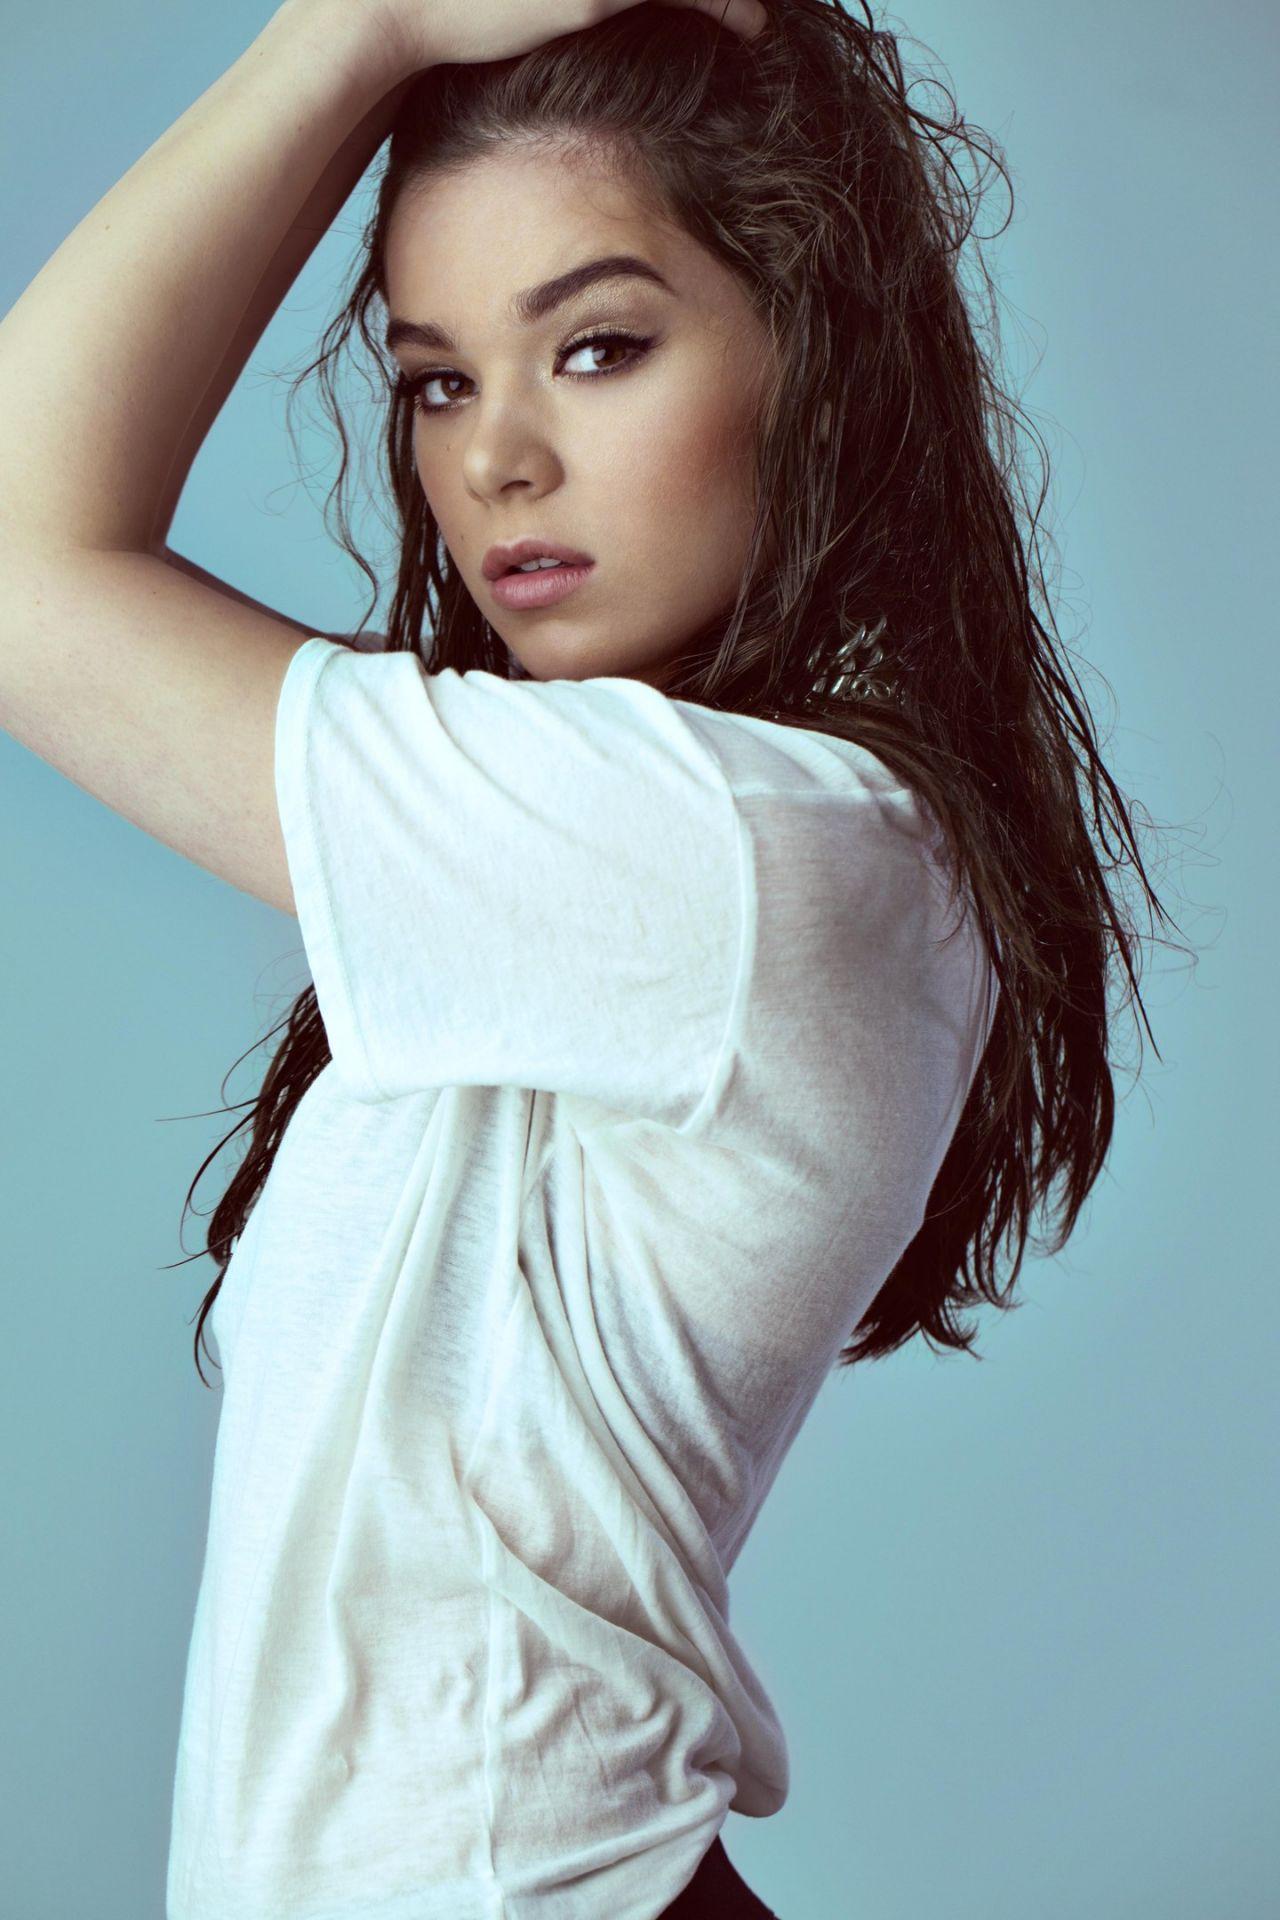 Hot Picture Of Hailee Steinfeld Movie's Lead